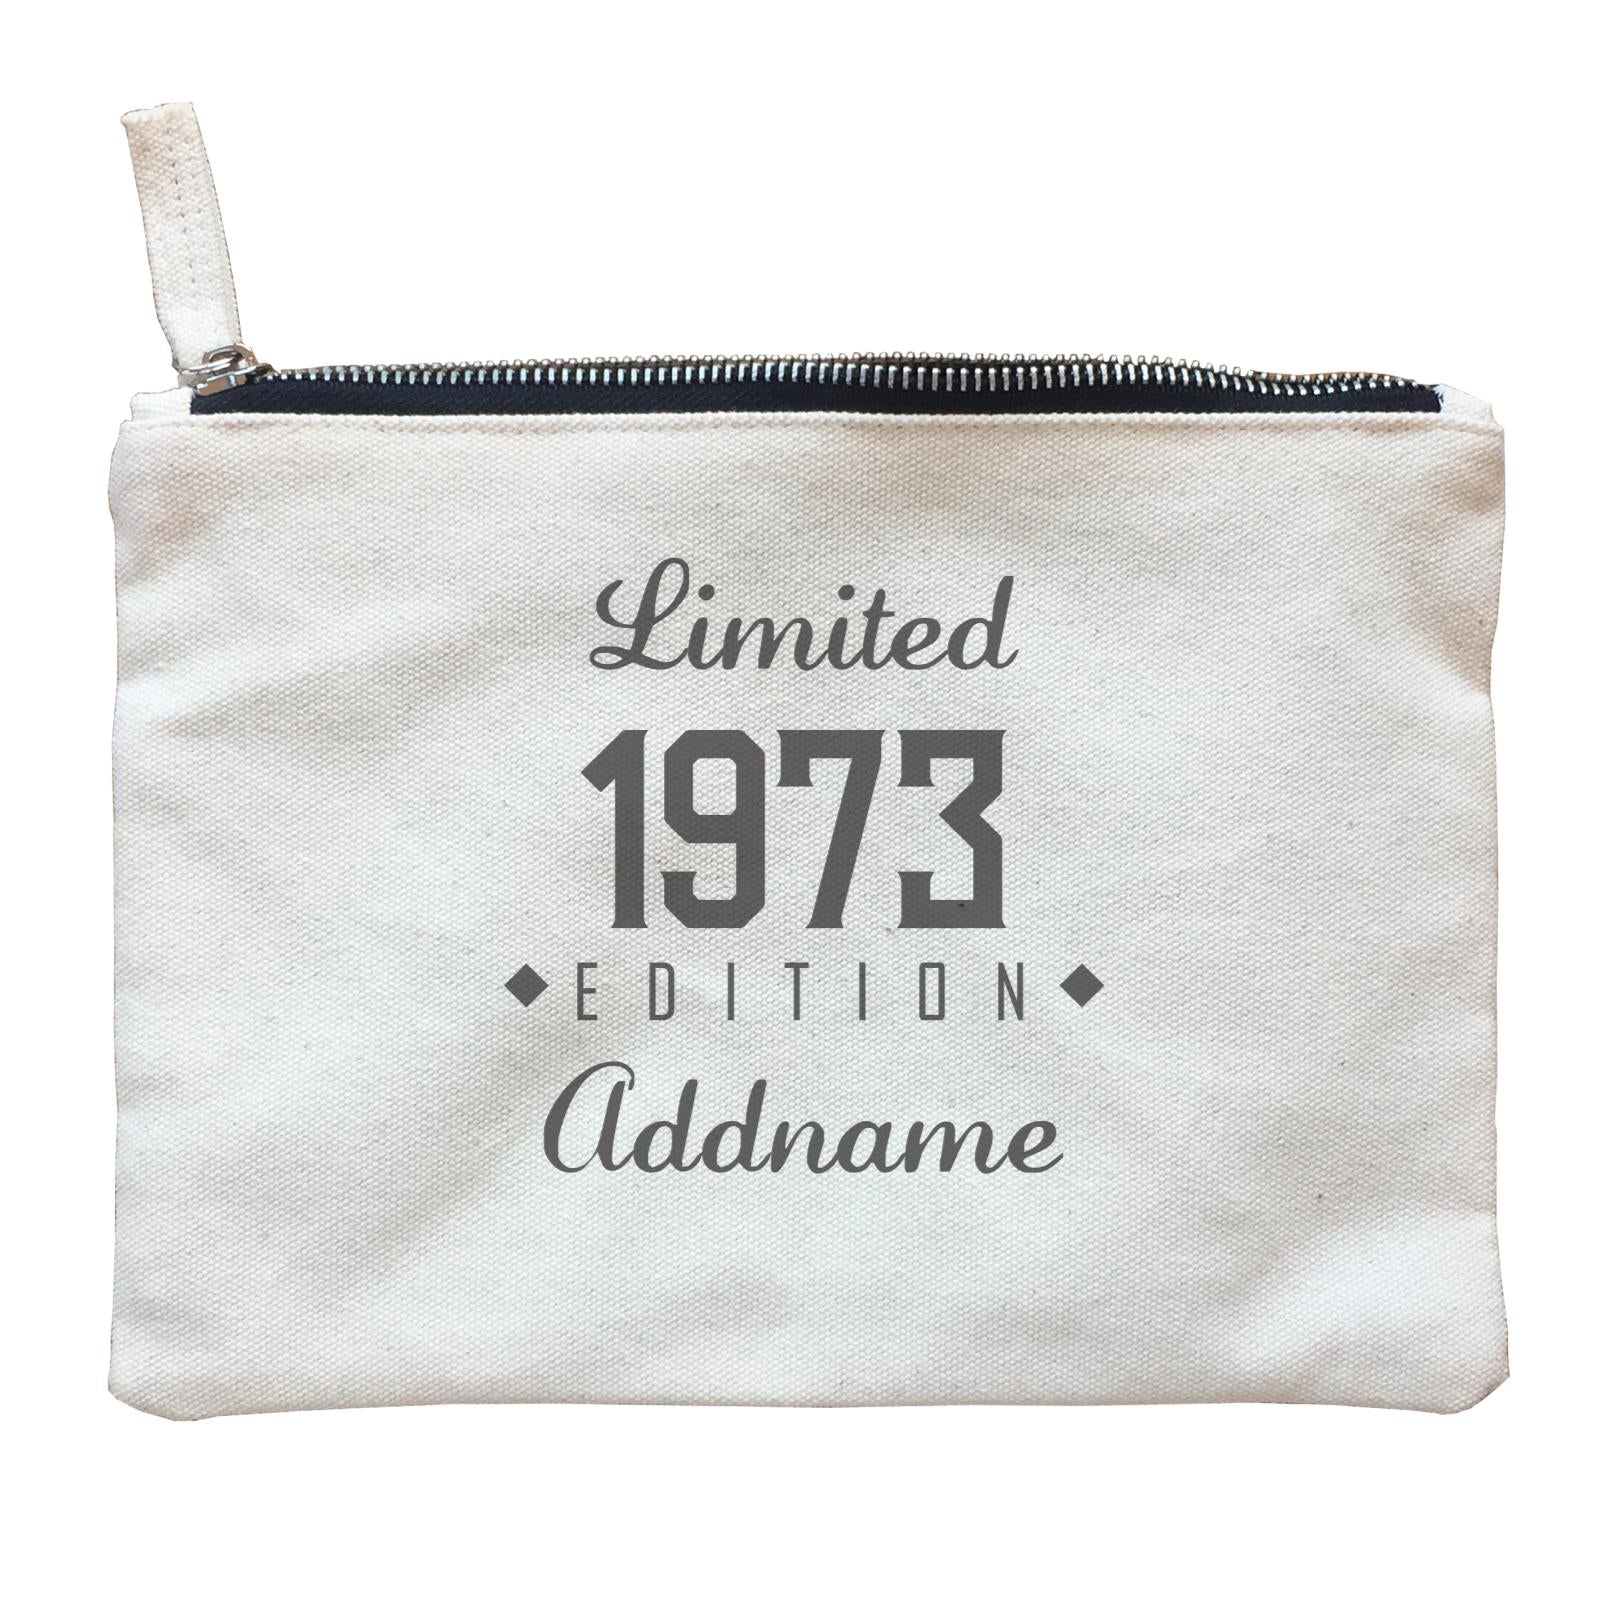 Personalize It Birthyear Limited Edition Diamond with Addname and Add Year Zipper Pouch